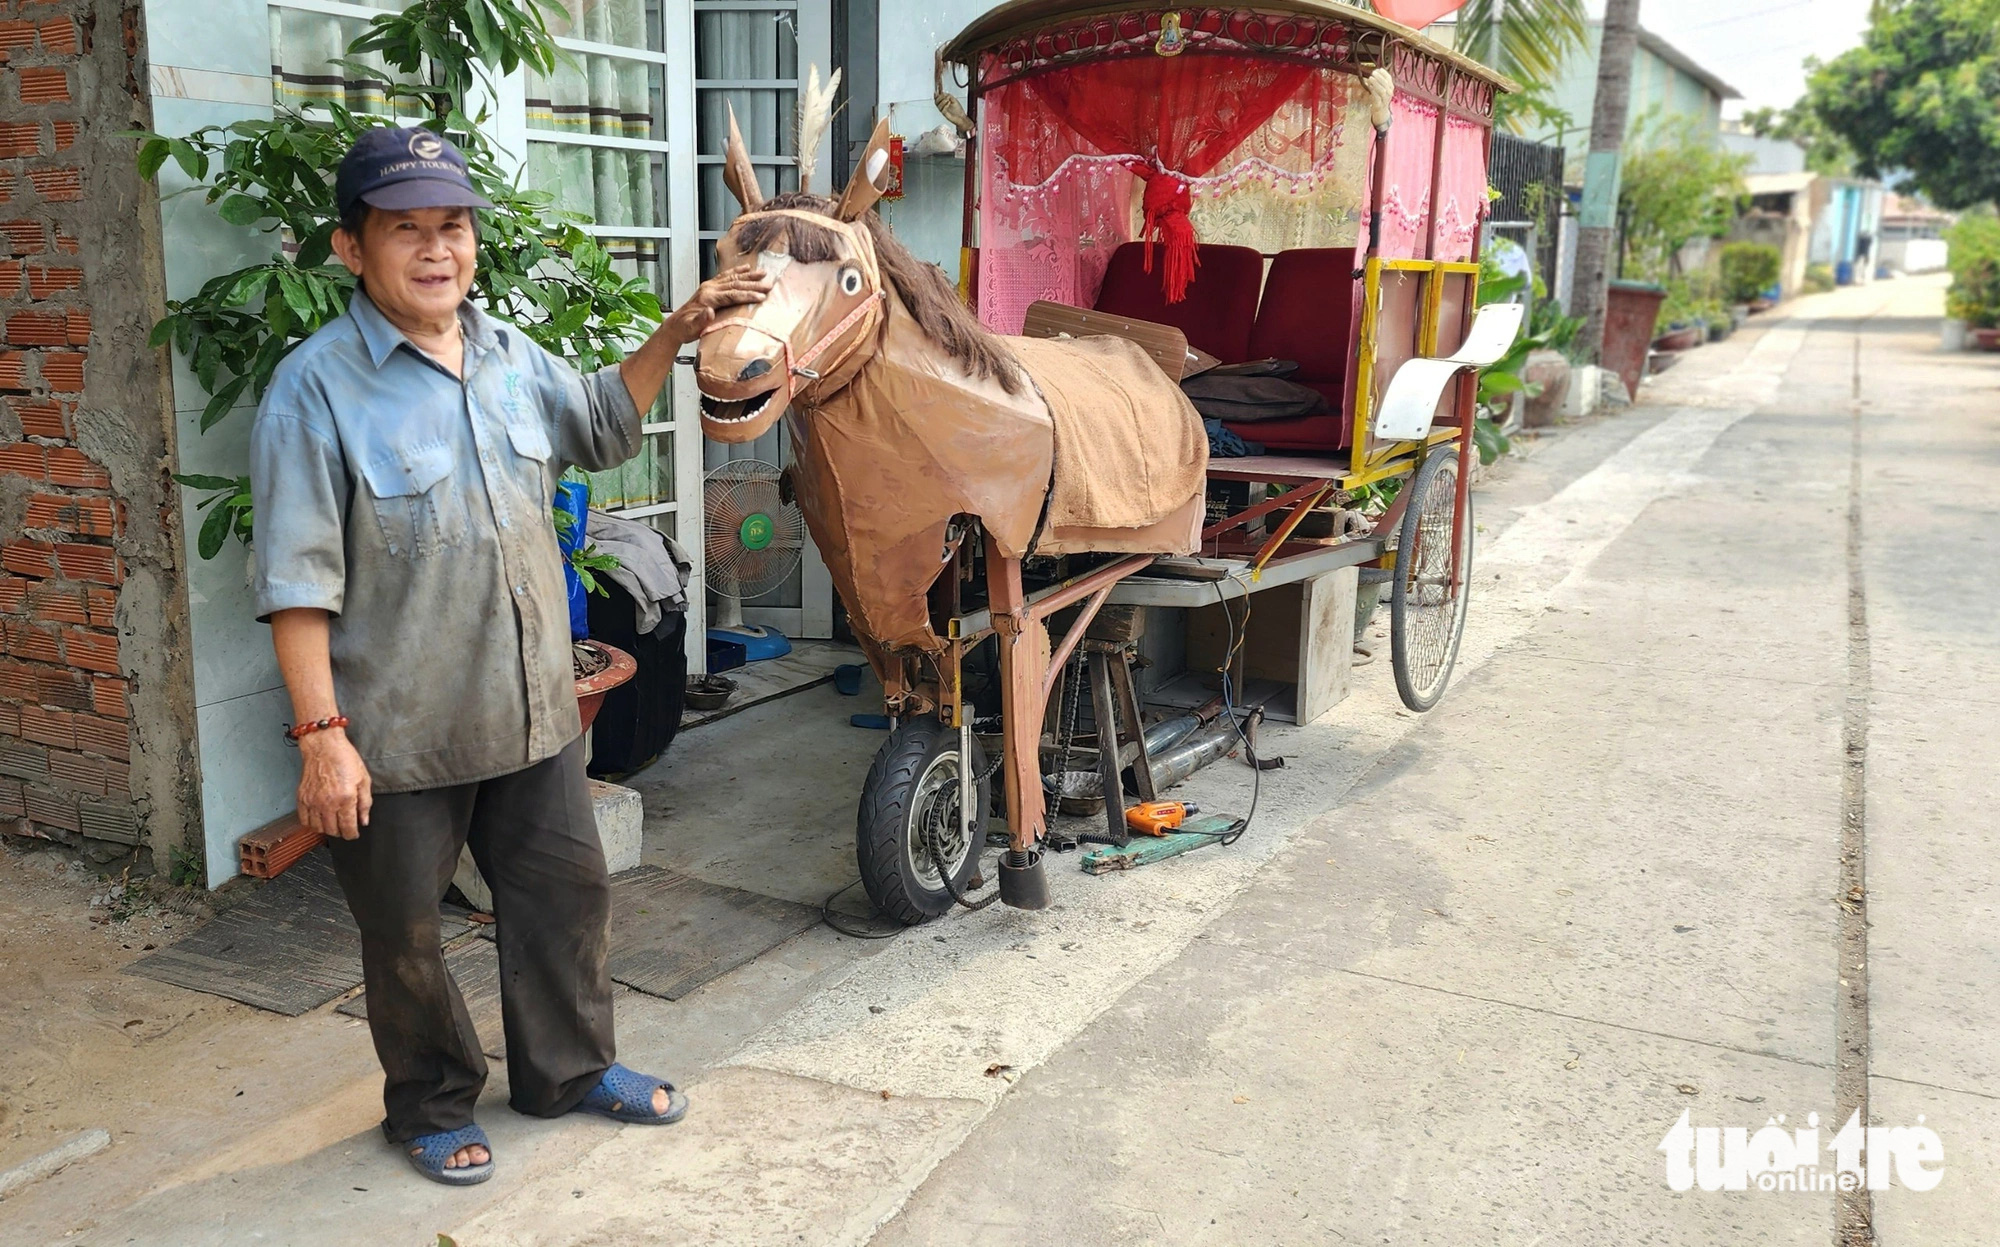 Mechanic crafts iron horse for strolls in Ho Chi Minh City